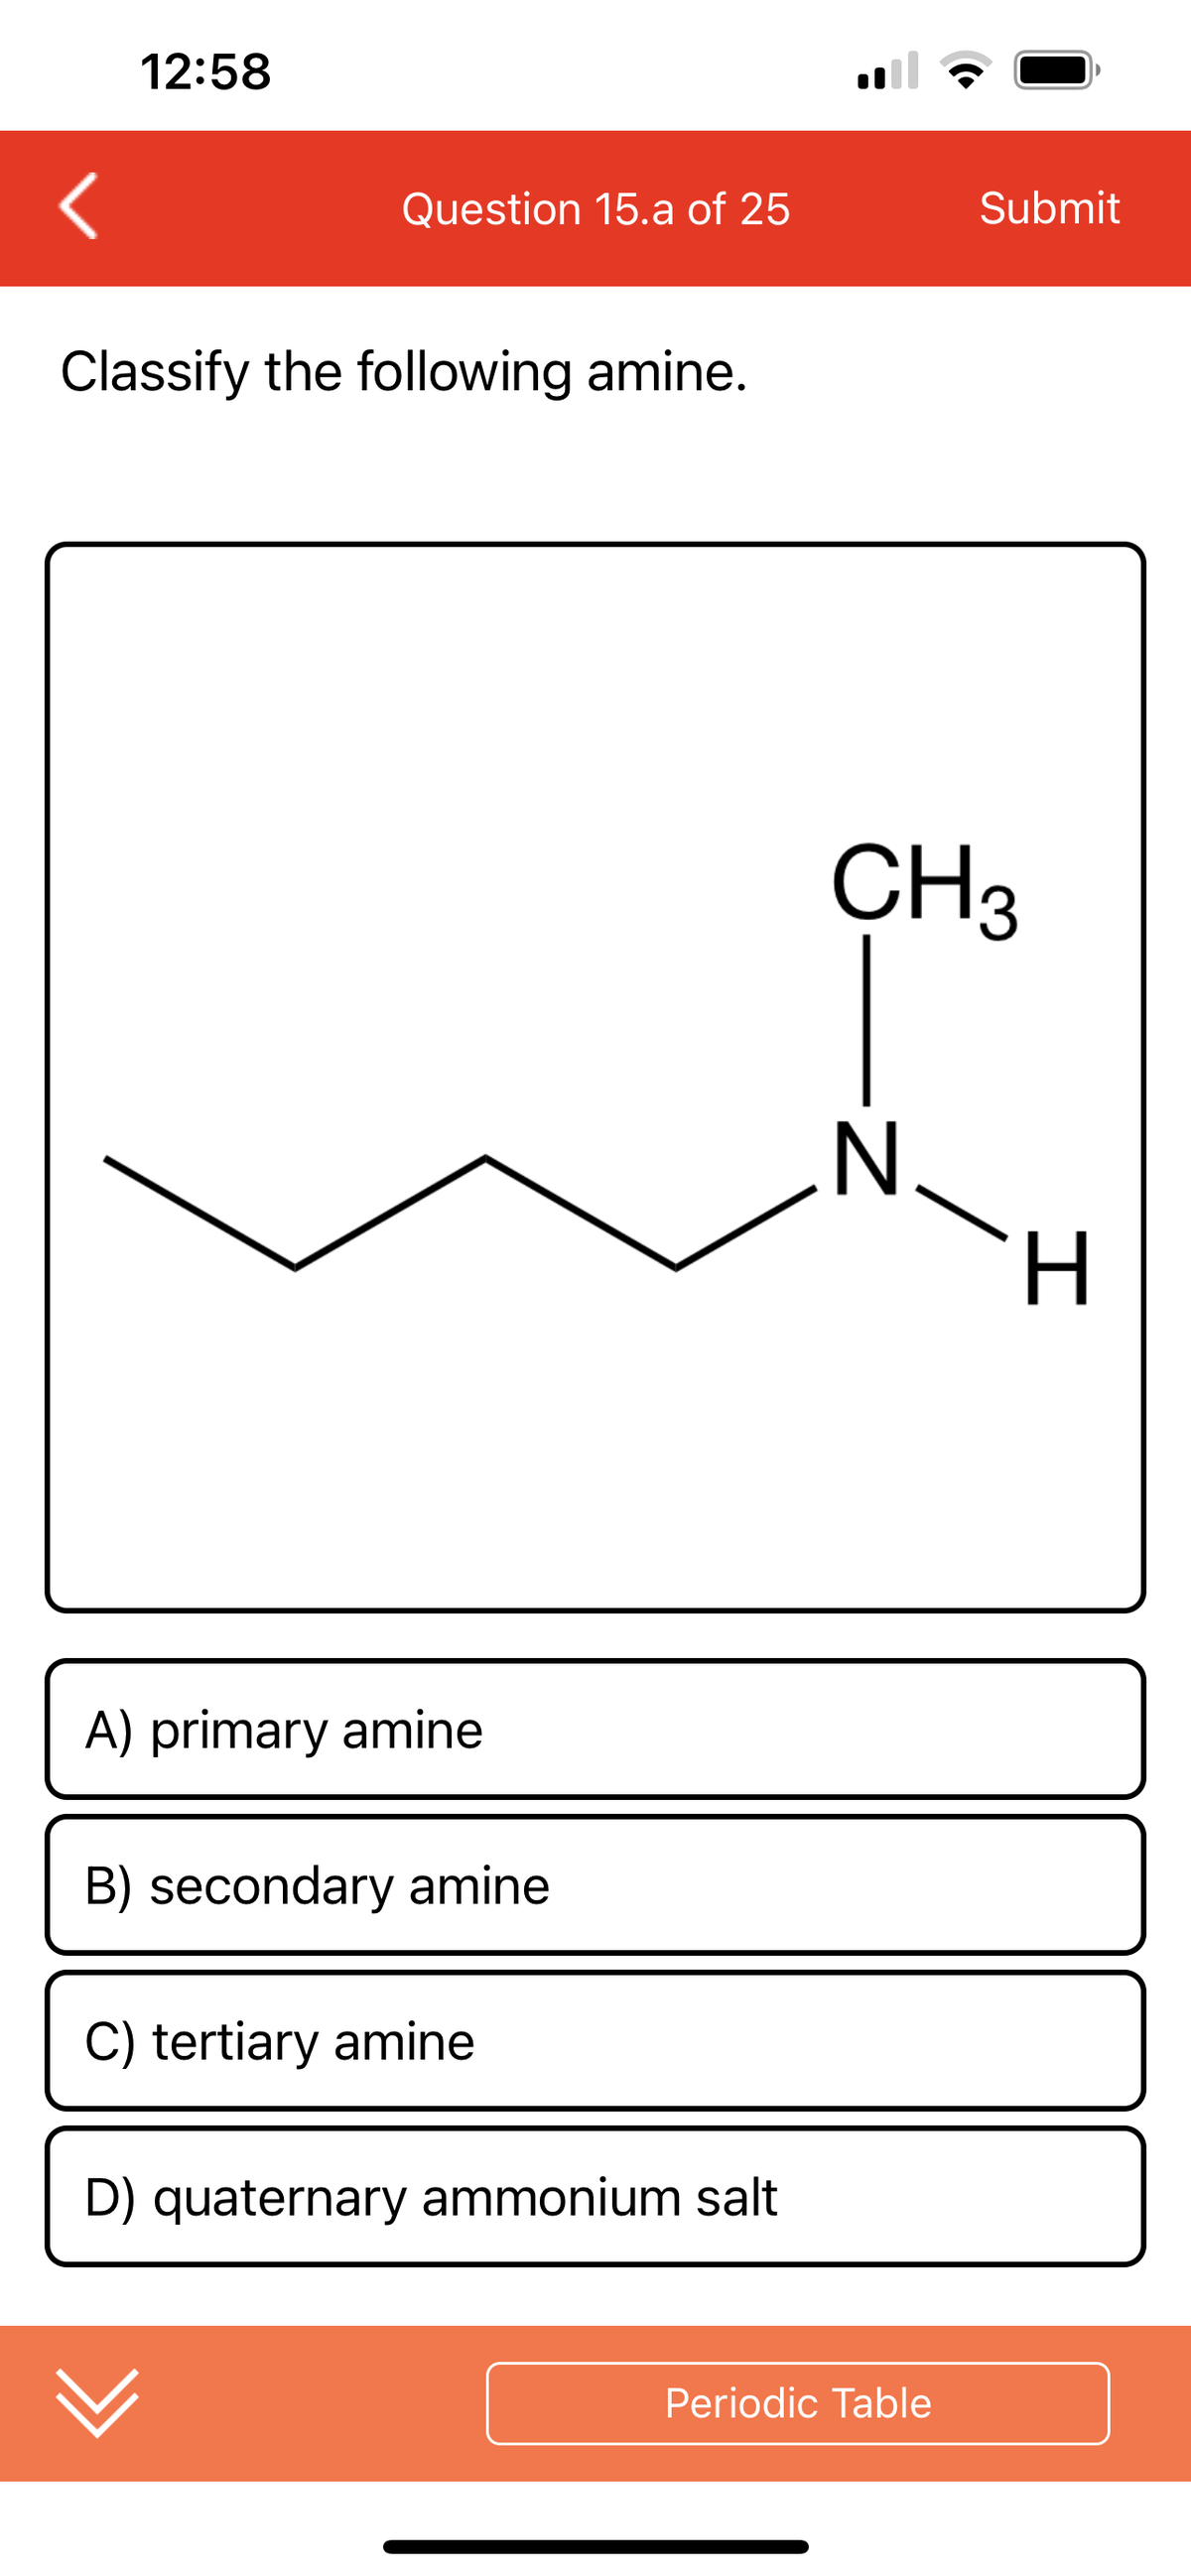 12:58
Question 15.a of 25
Classify the following amine.
A) primary amine
B) secondary amine
C) tertiary amine
D) quaternary ammonium salt
CH3
-Z
N
Submit
/
Periodic Table
H